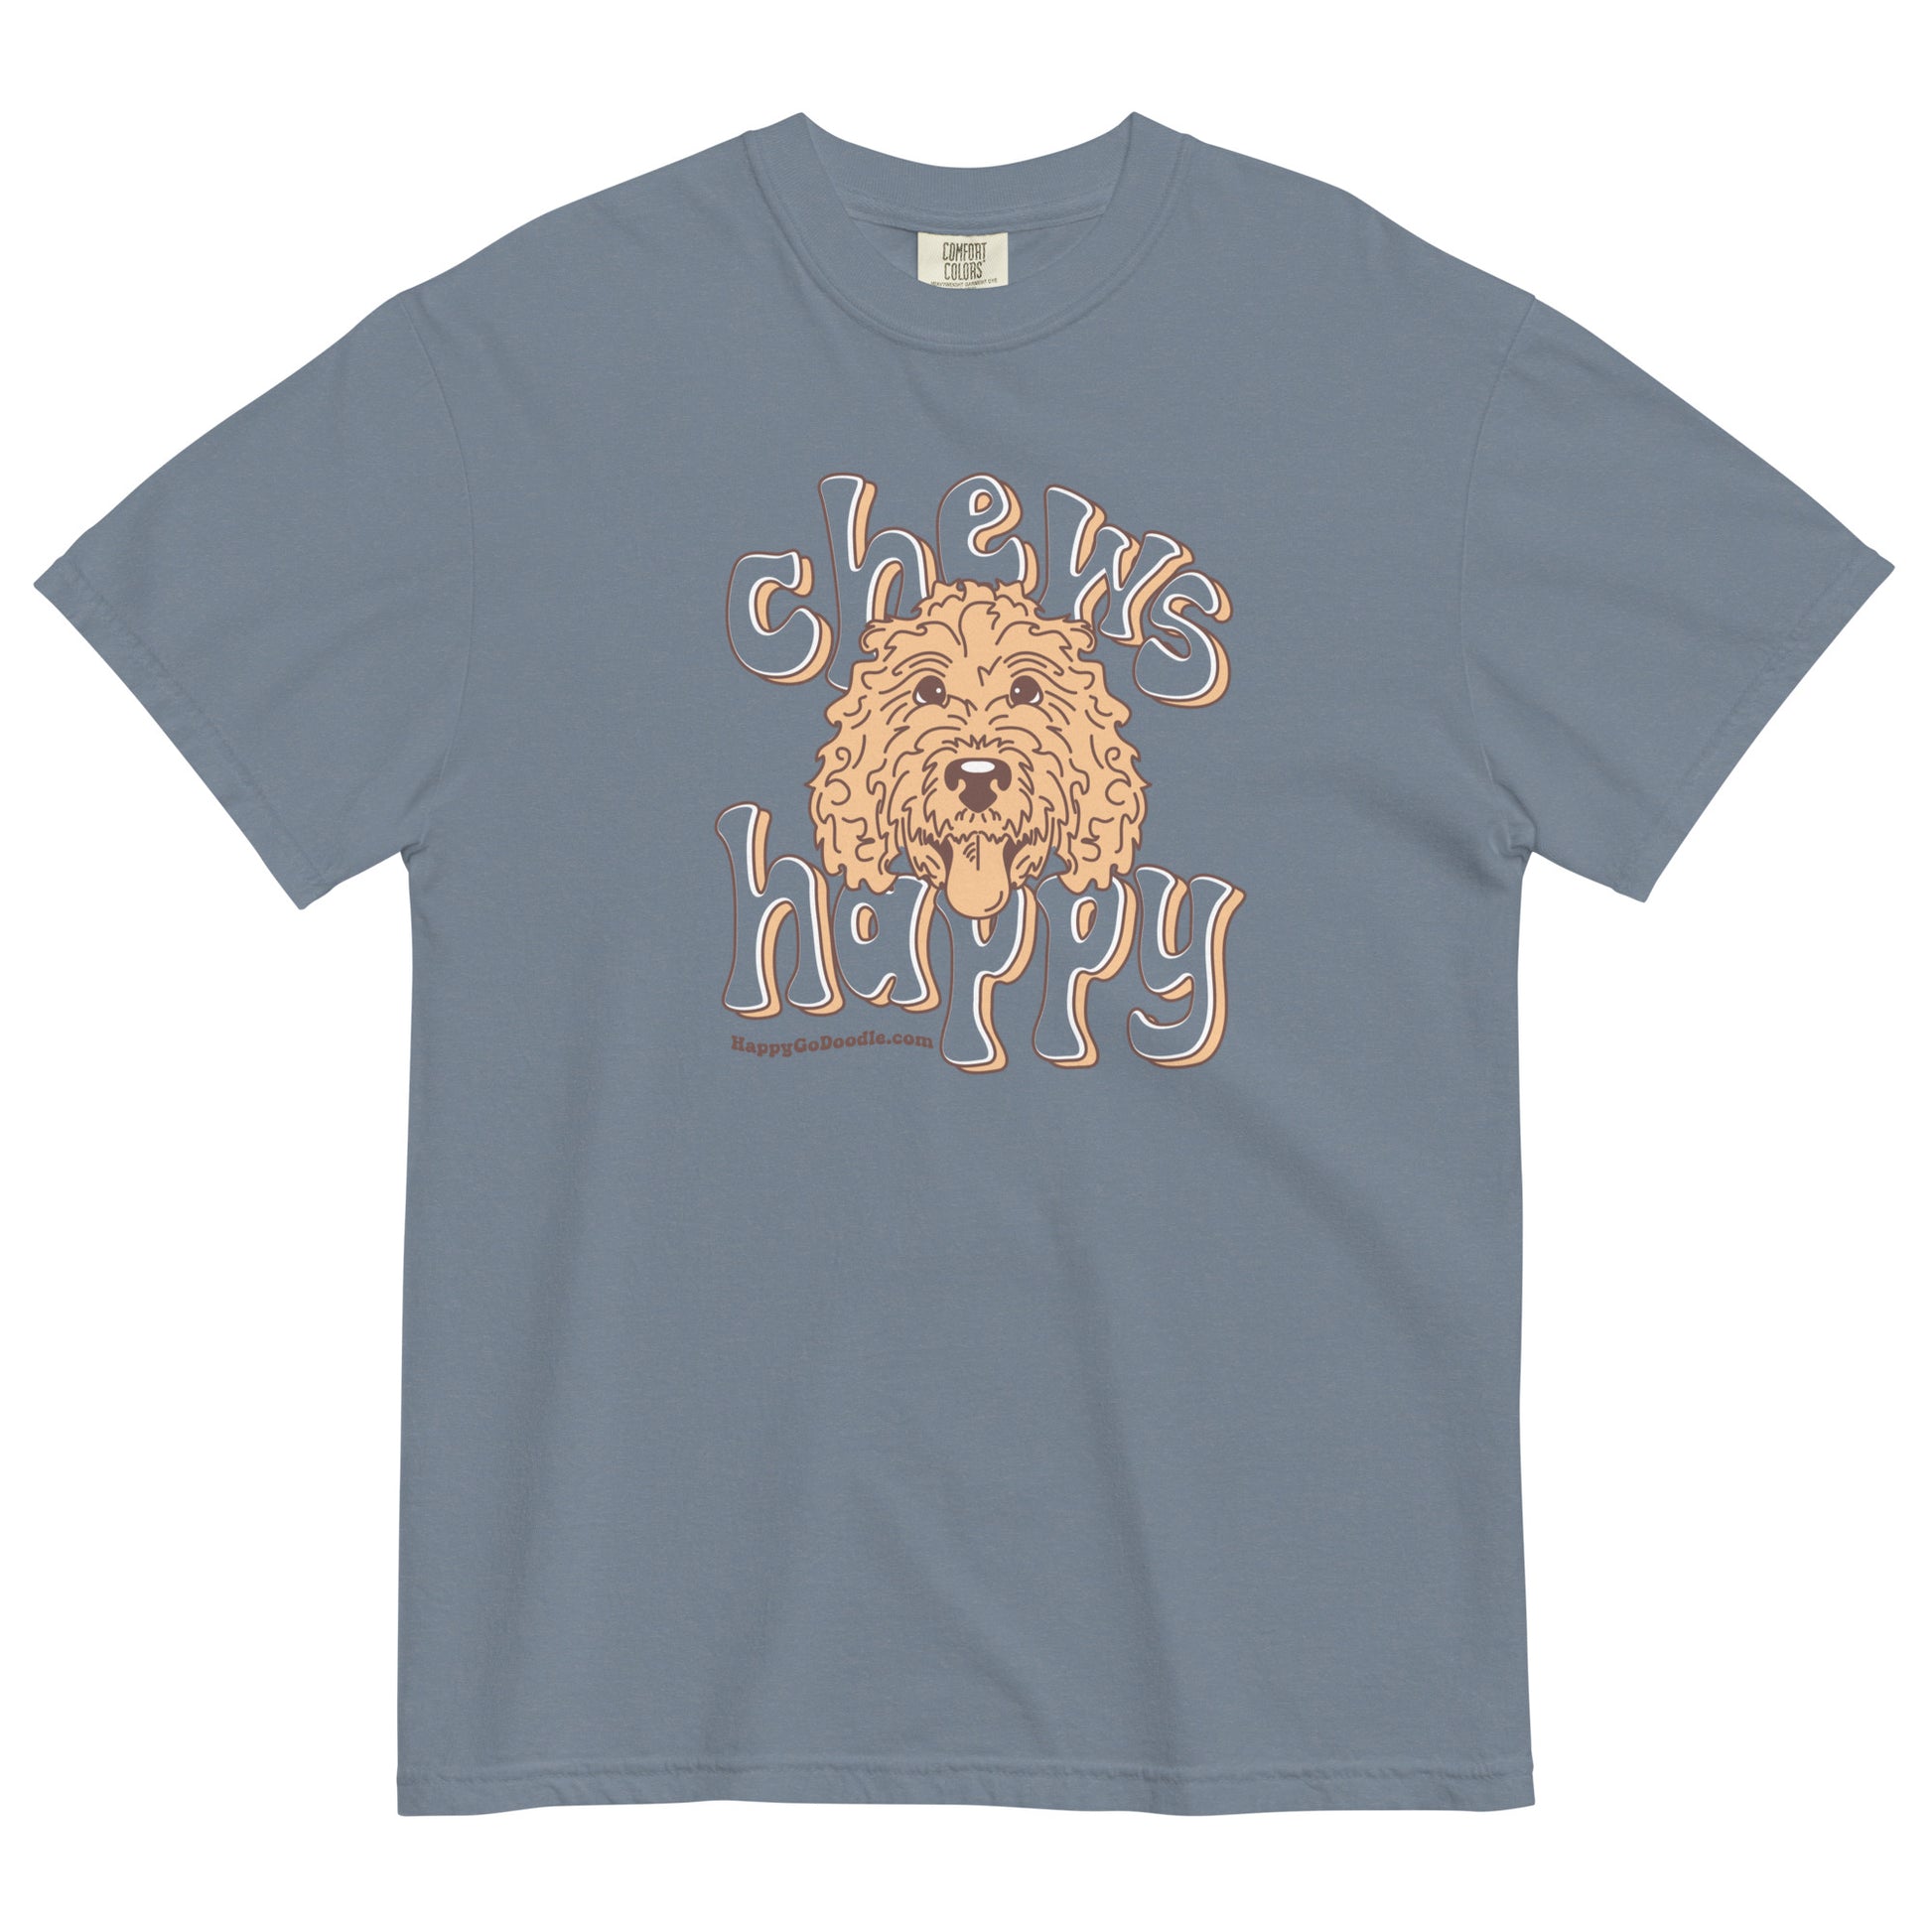 Goldendoodle comfort colors t-shirt with Goldendoodle face and words "Chews Happy" in blue jean color